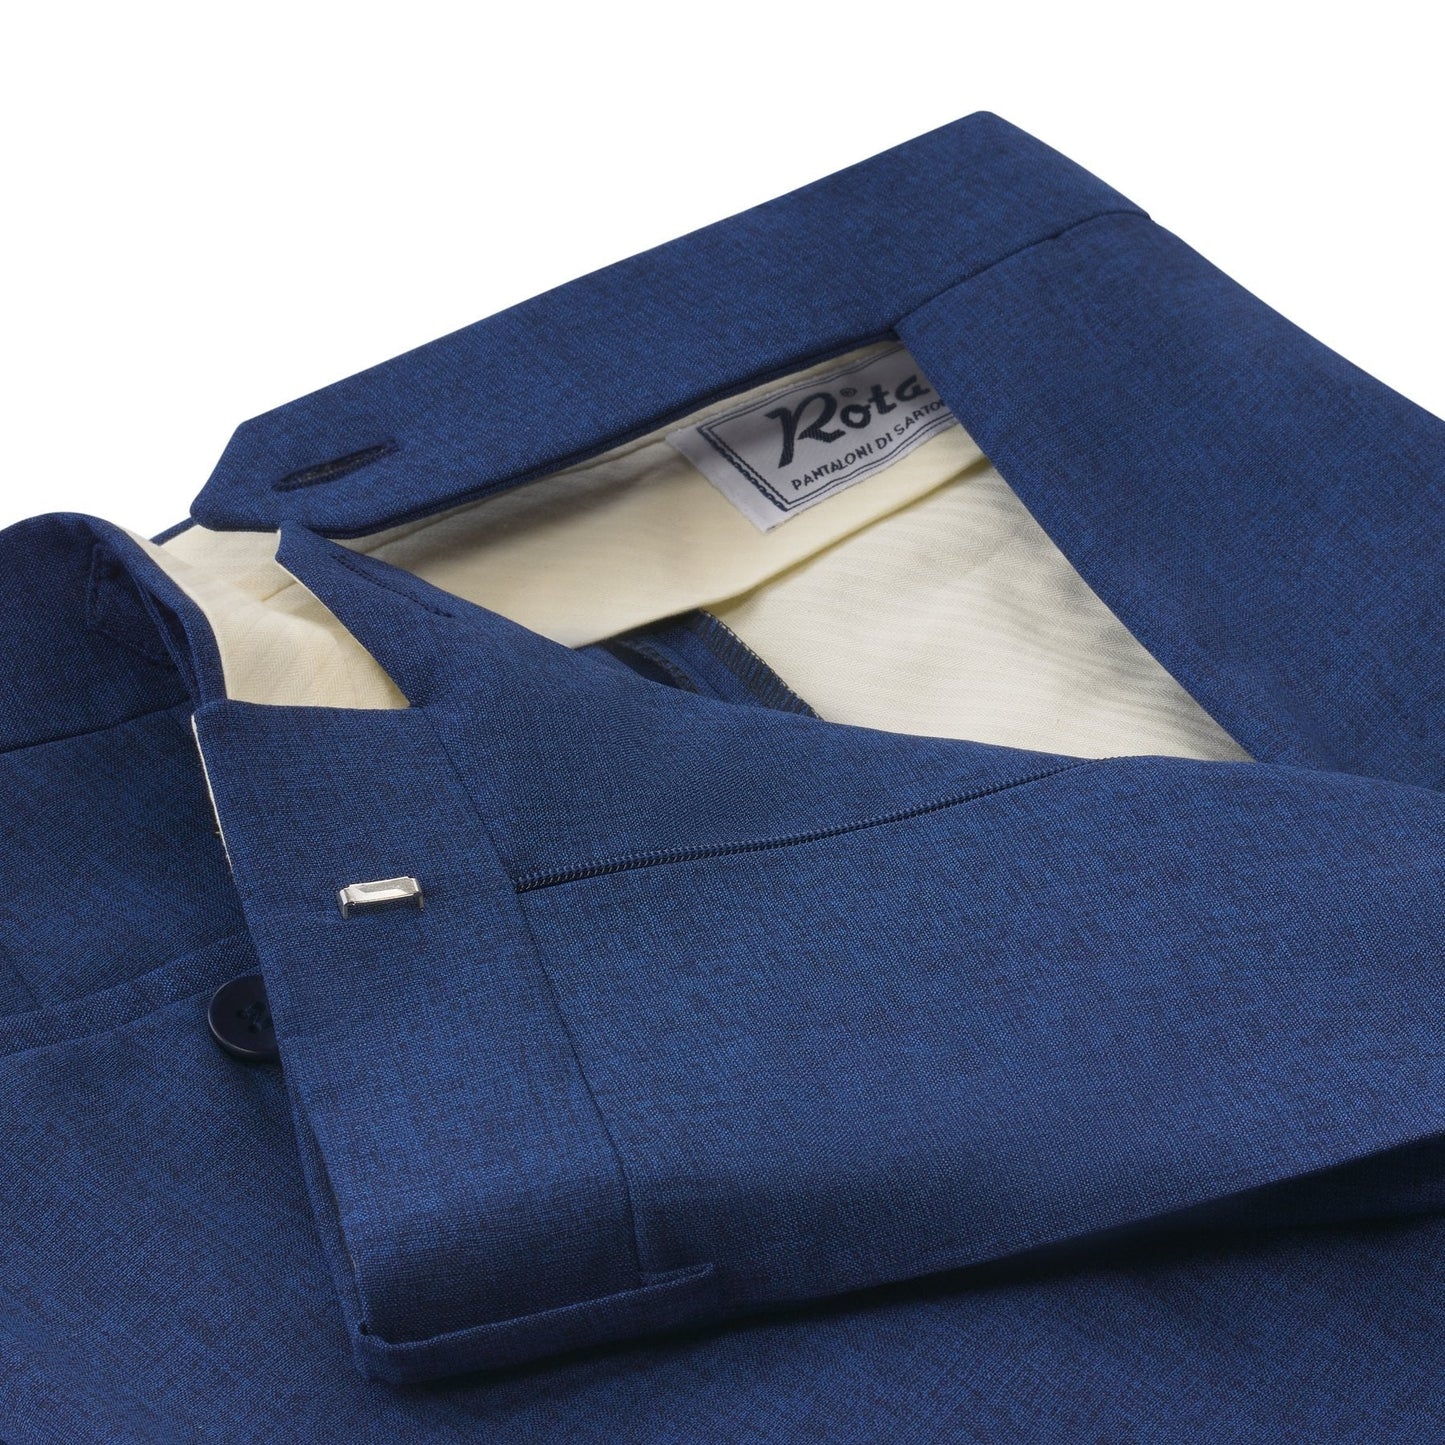 Rota Slim-Fit Pleated Wool and Silk-Blend Blue Trousers with Buckle Waist Adjusters - SARTALE